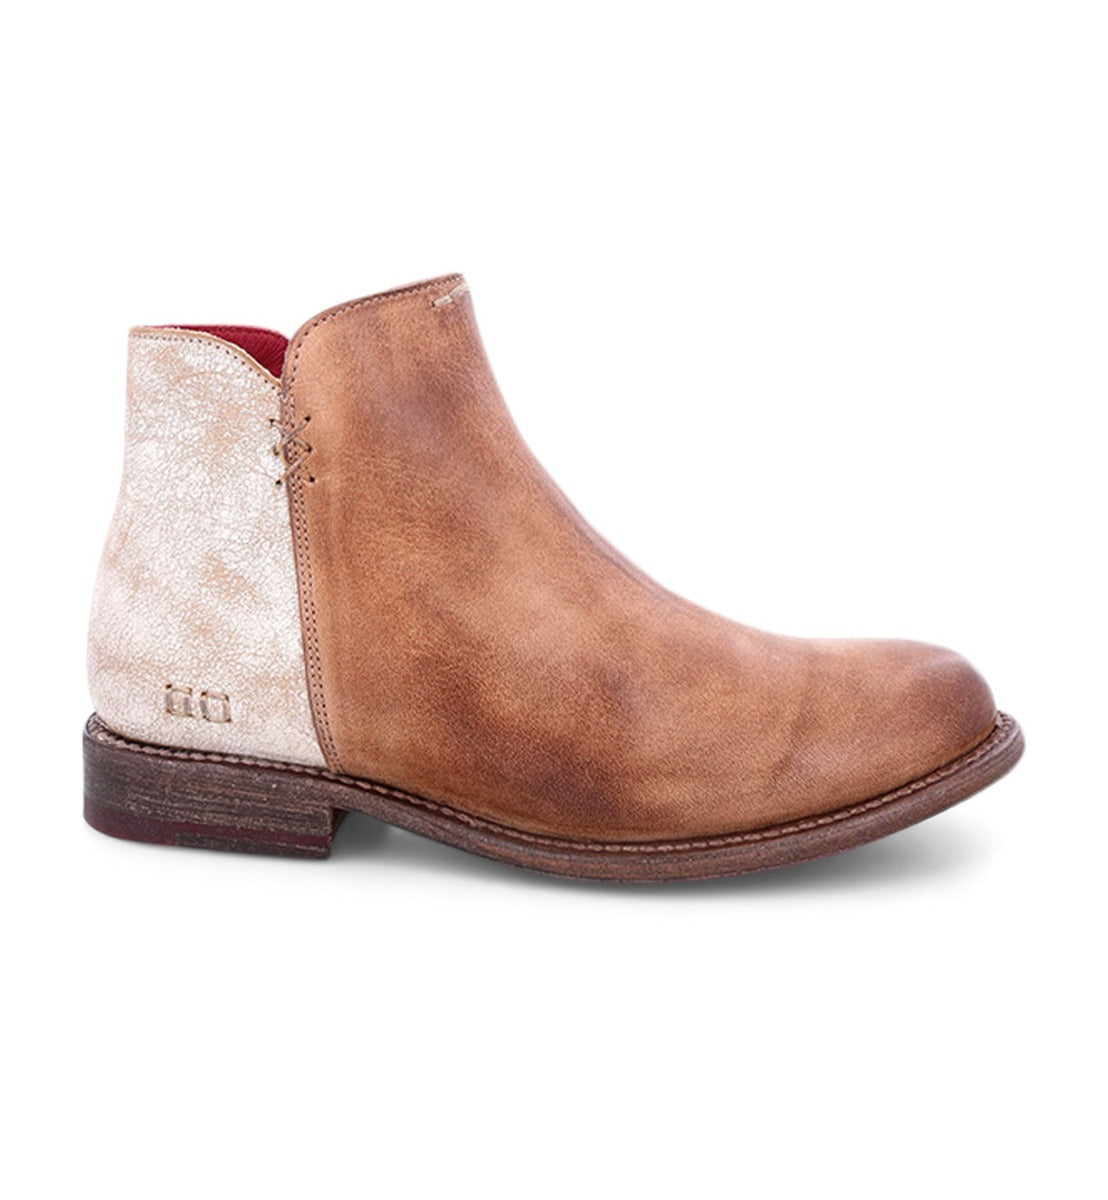 The Yurisa women's chelsea boot in tan and white leather by Bed Stu.